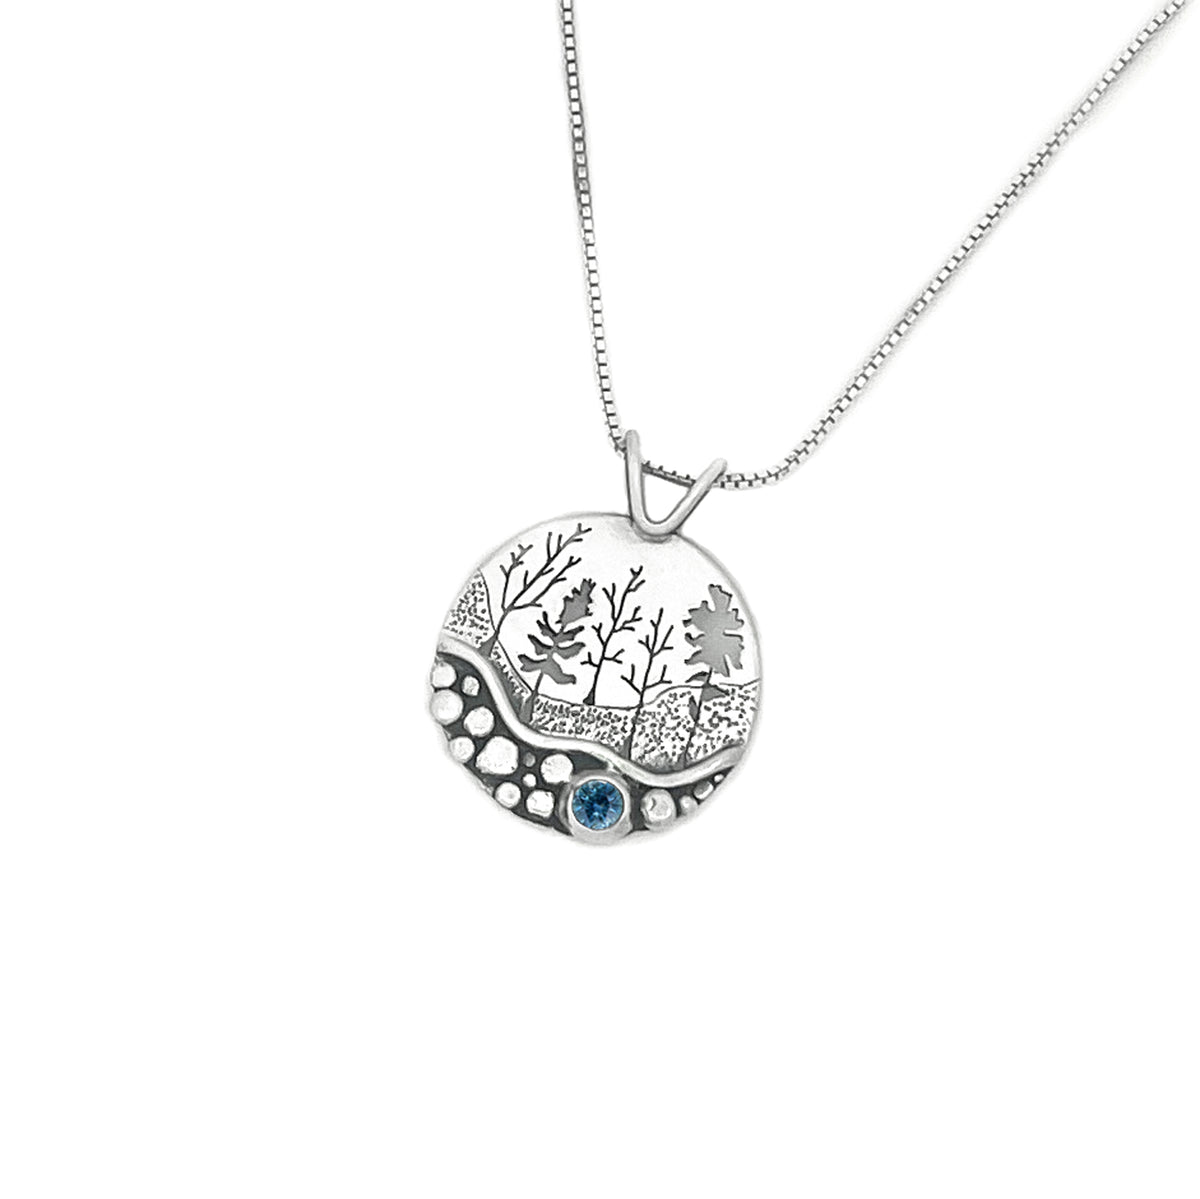 Silver Pebble Forest Birthstone Pendant - your choice of 4mm stone - Silver Pendant September - Montana Sapphire December - Sky Blue Topaz 7258 - handmade by Beth Millner Jewelry